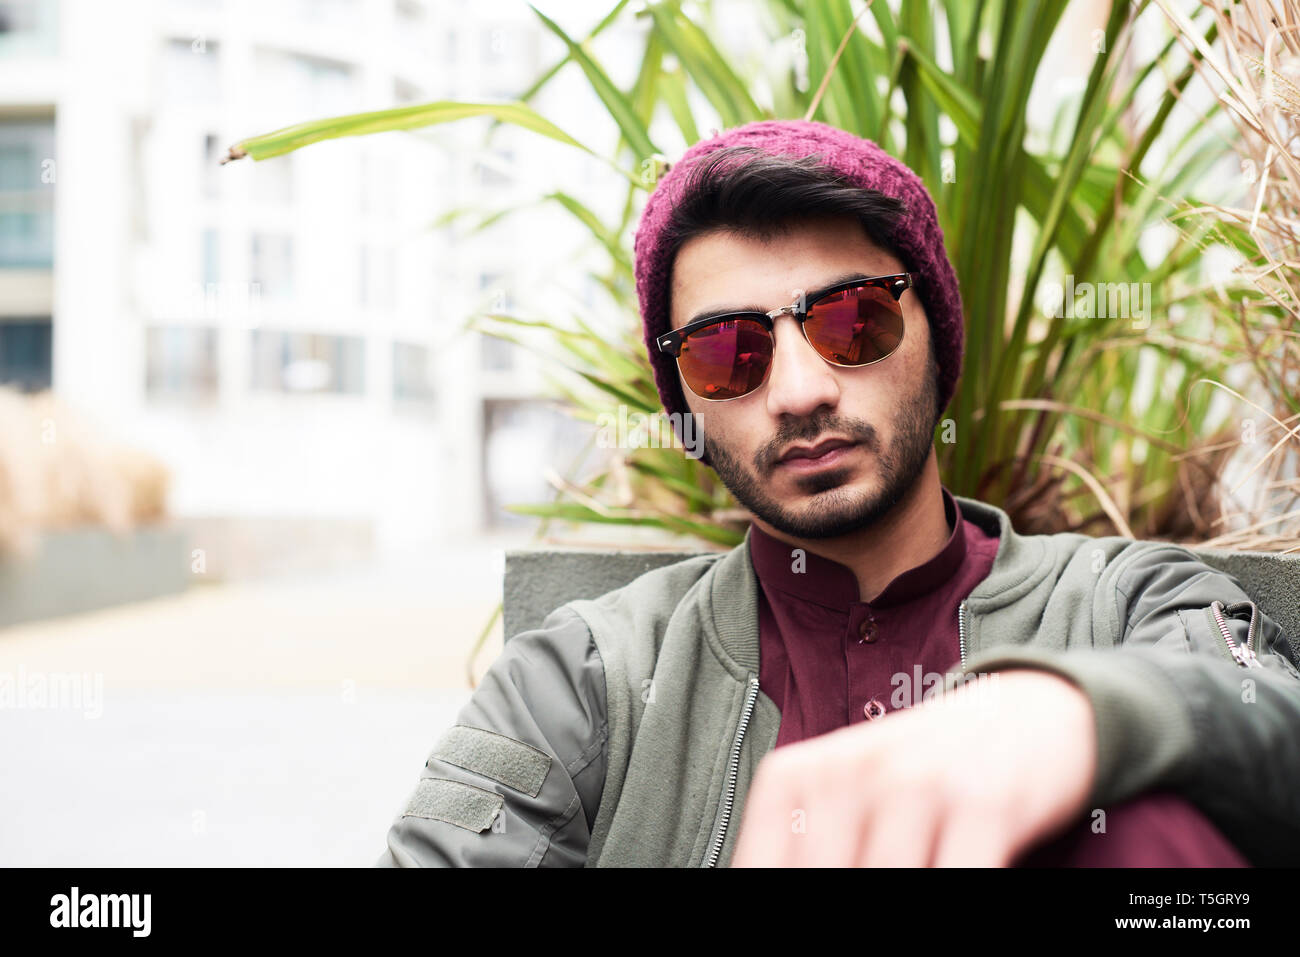 Portrait of fashionable man in mirrored colored sunglasses and purple knit hat against green plant Stock Photo